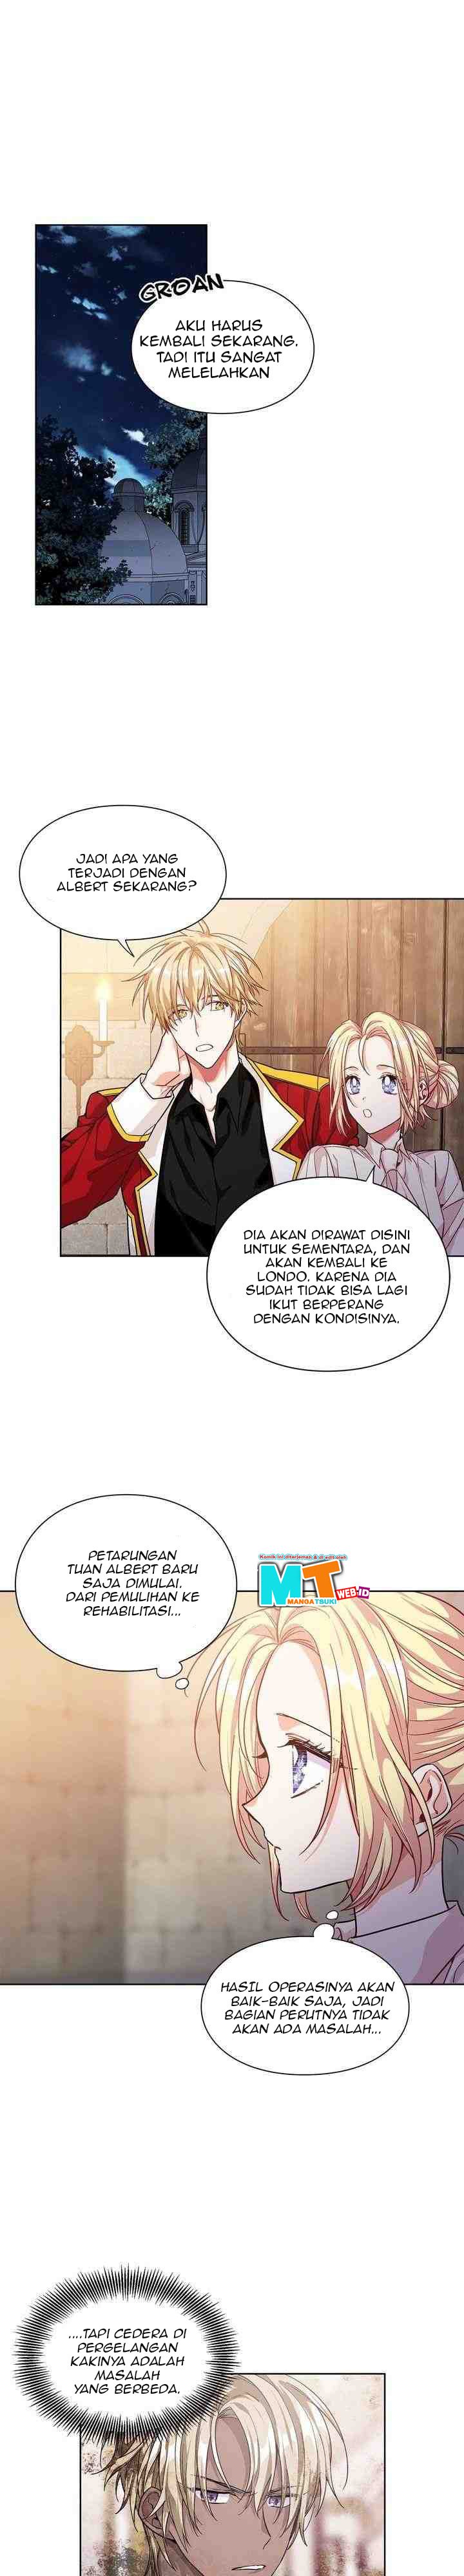 Doctor Elise: The Royal Lady With the Lamp Chapter 66